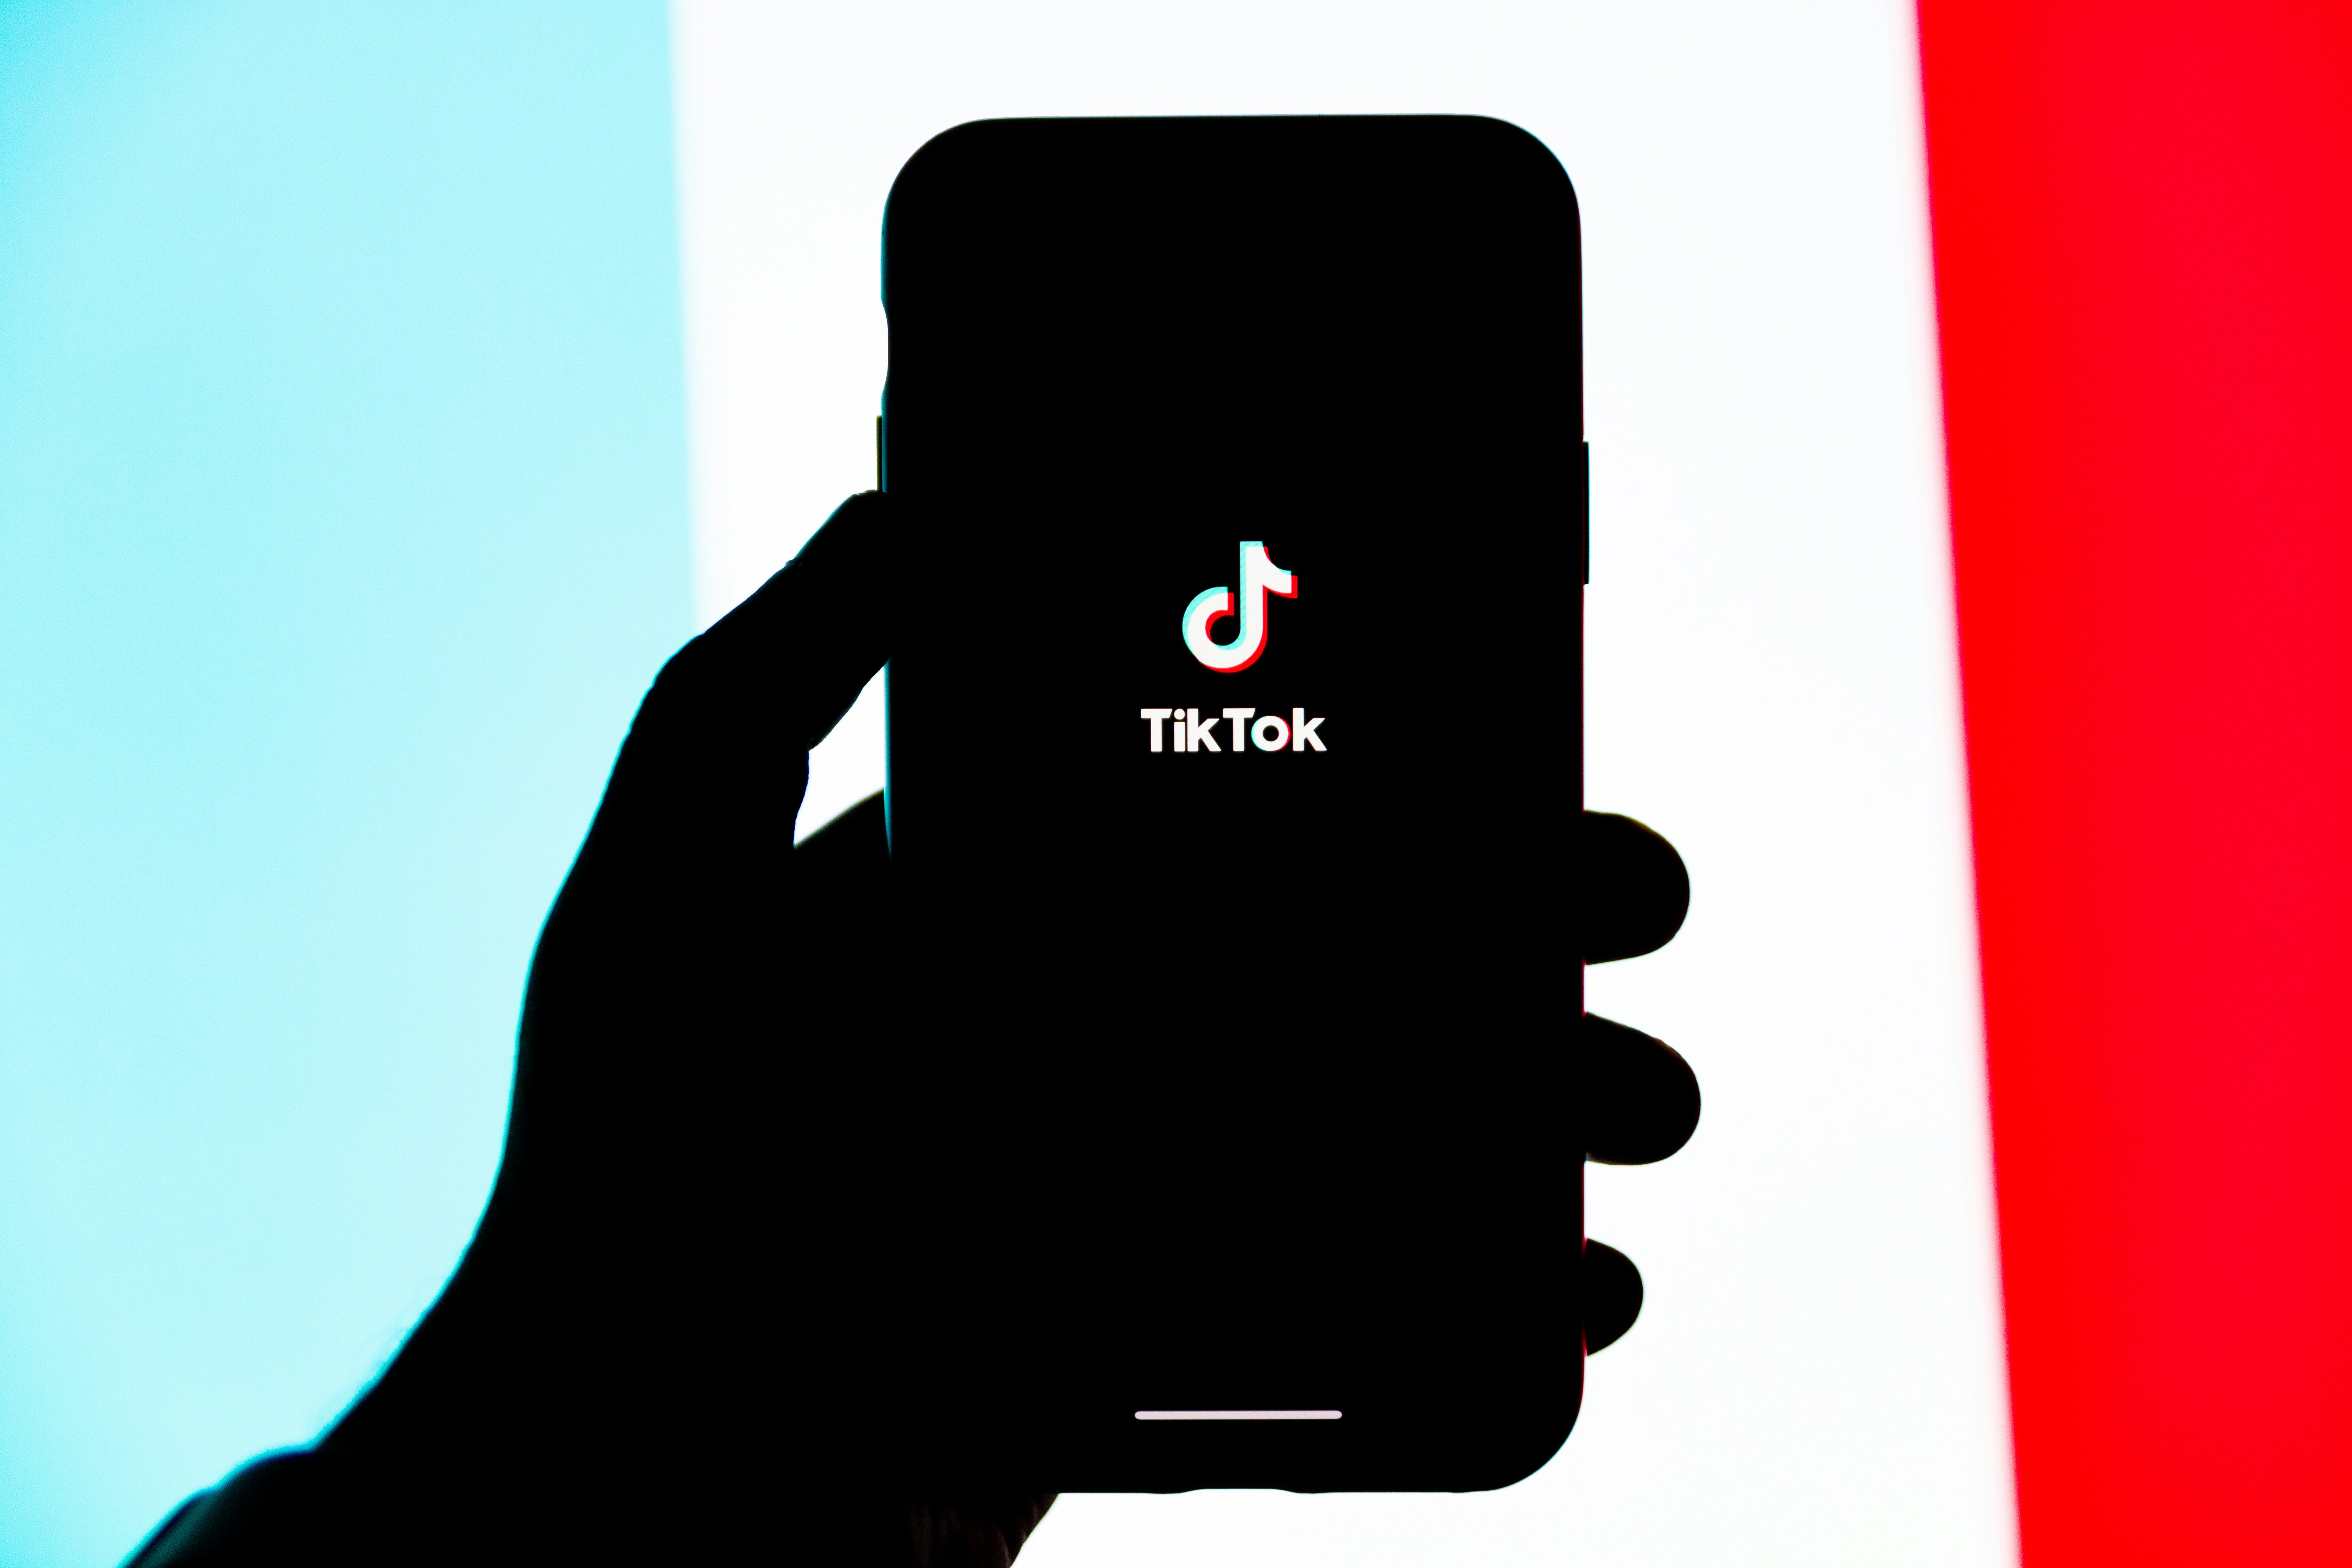 Ipsos ‘TikTok's Made Me’ Report: Revealing the Influence of TikTok in Prompting Consumer Action for Brands